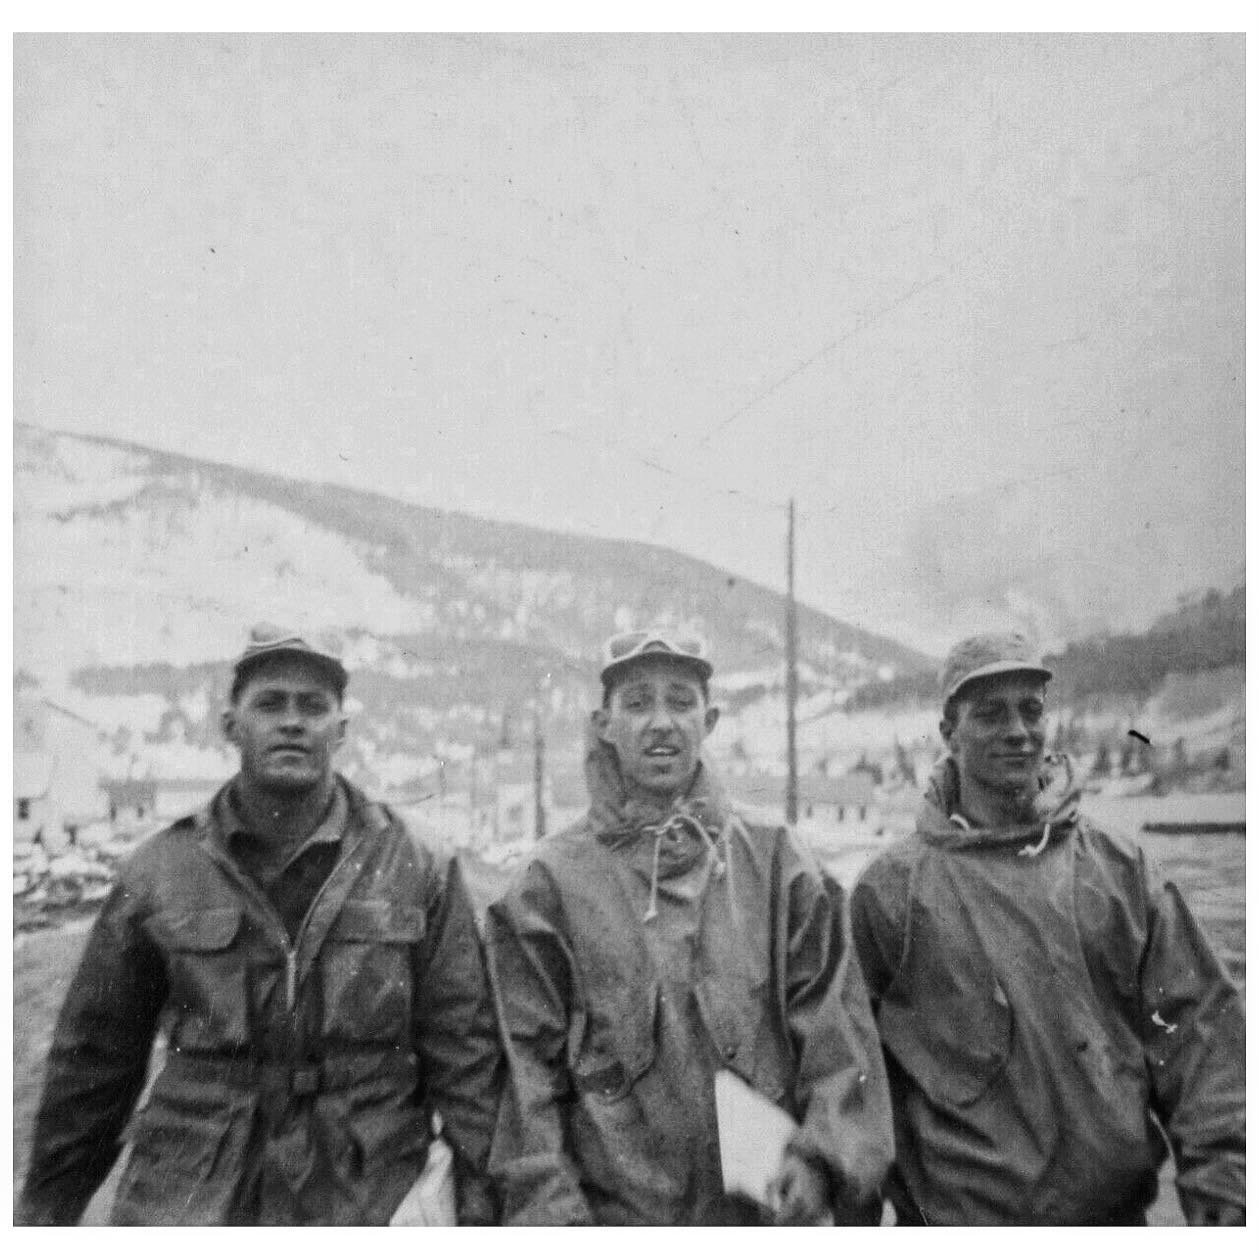 A wonderful image from the Second World War of some kitted out US Army 10th Mountain Division men that I spotted on Ebay recently. Had to share! 

Have a great weekend, folks.